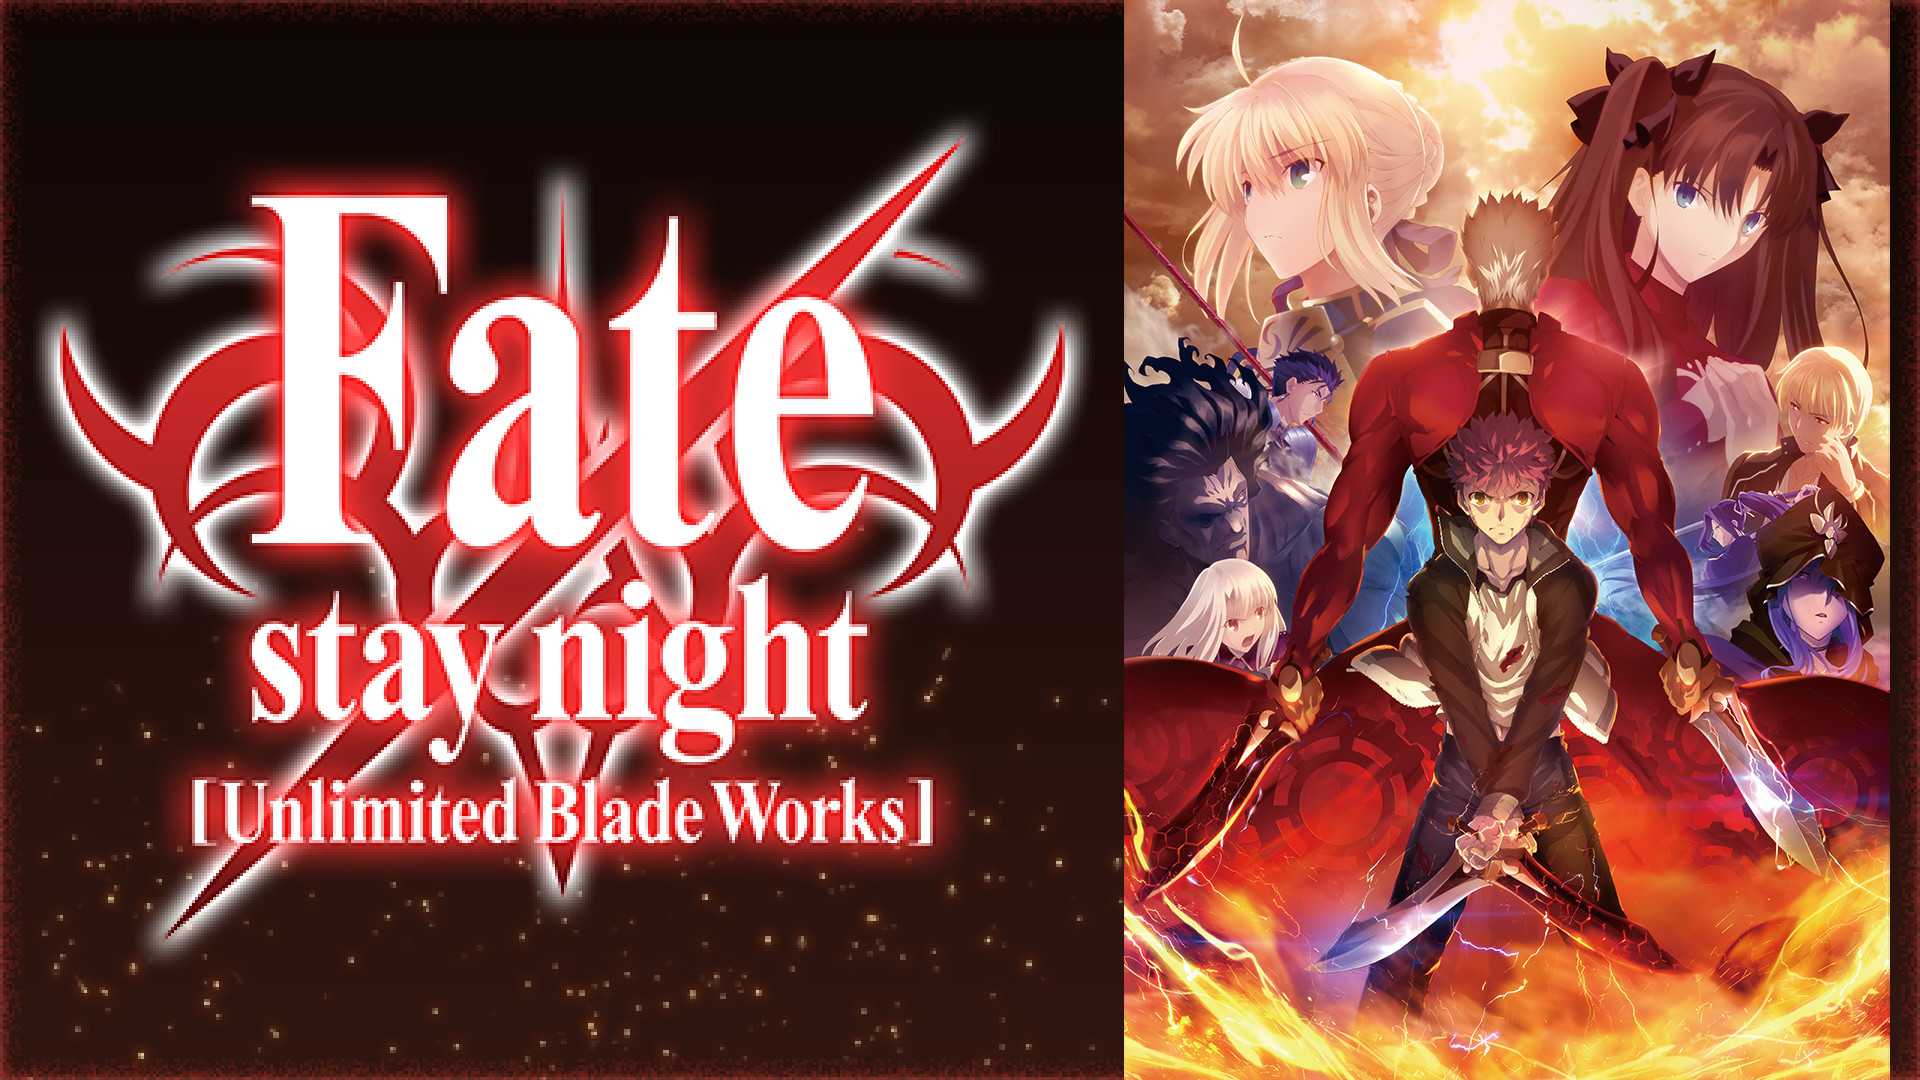 TVアニメ「Fate/stay night [Unlimited Blade Works]」（全26話）